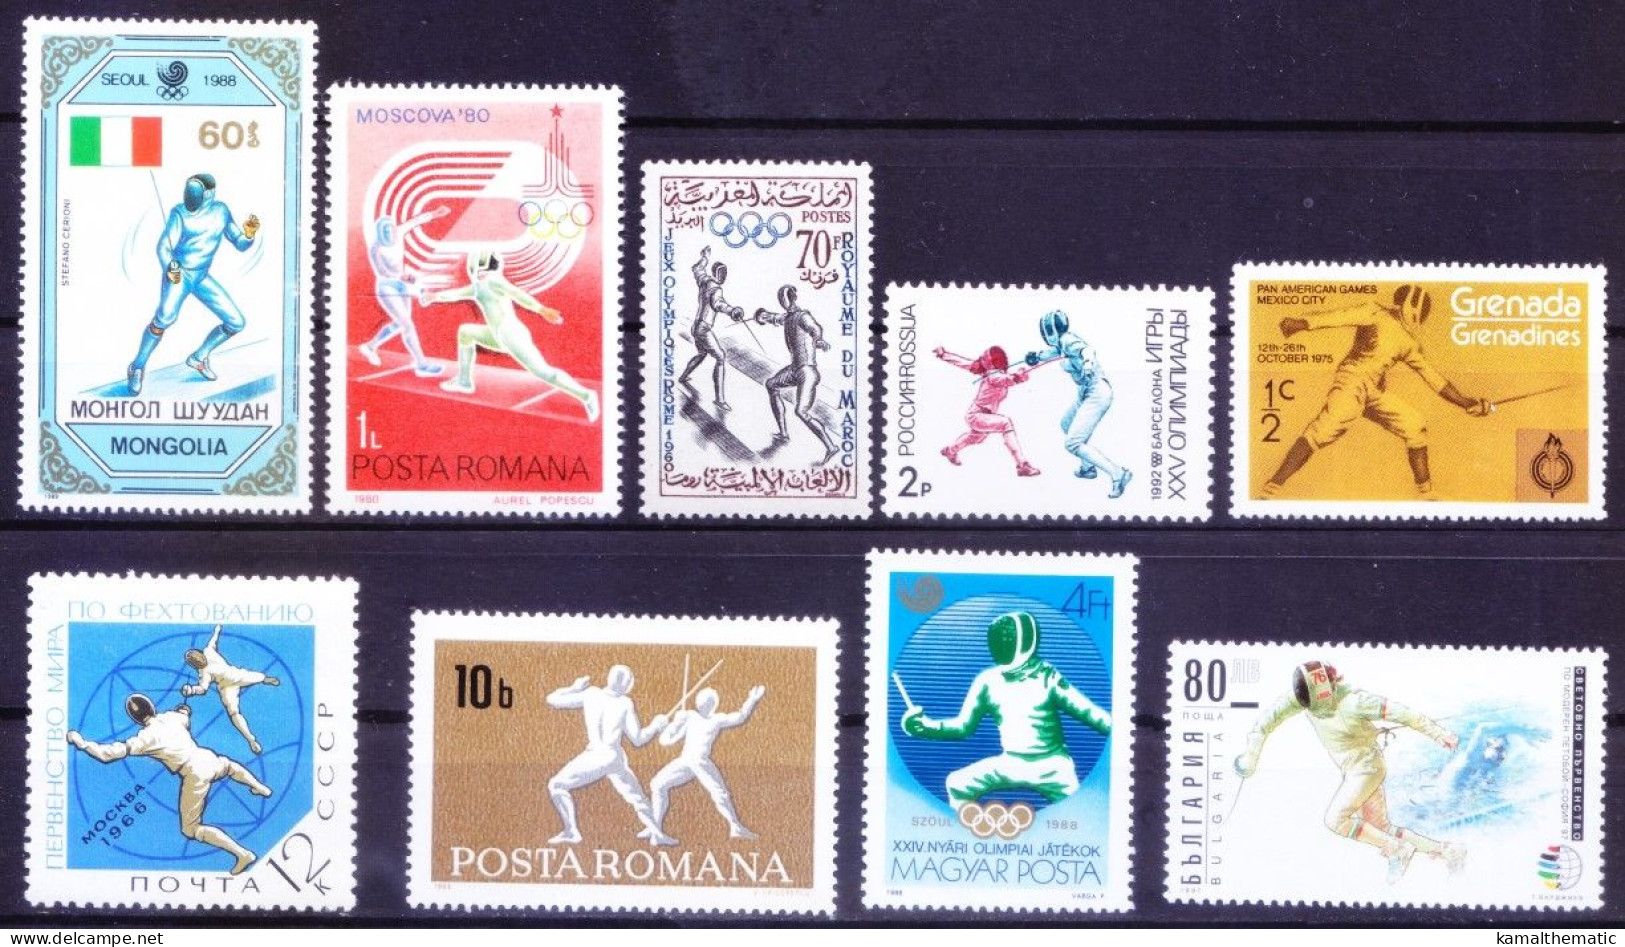 Fencing, Sword Fighting, Sports, Olympic, 9 Different MNH Stamps - Fechten